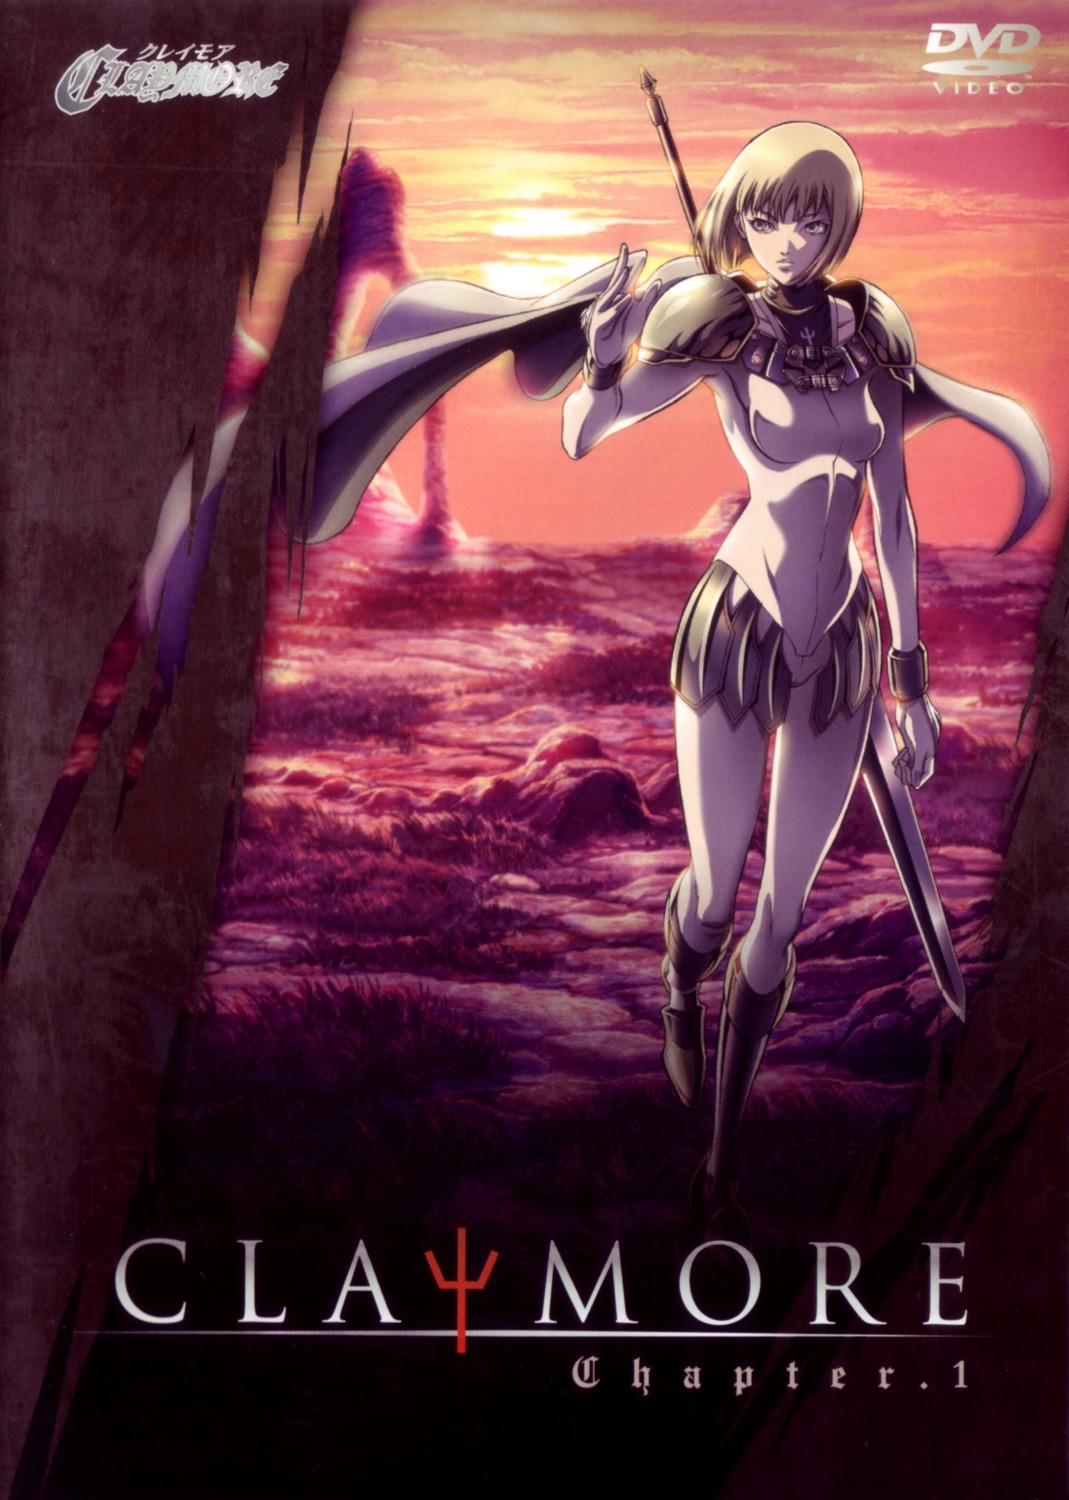 armor clare claymore disc_cover sword